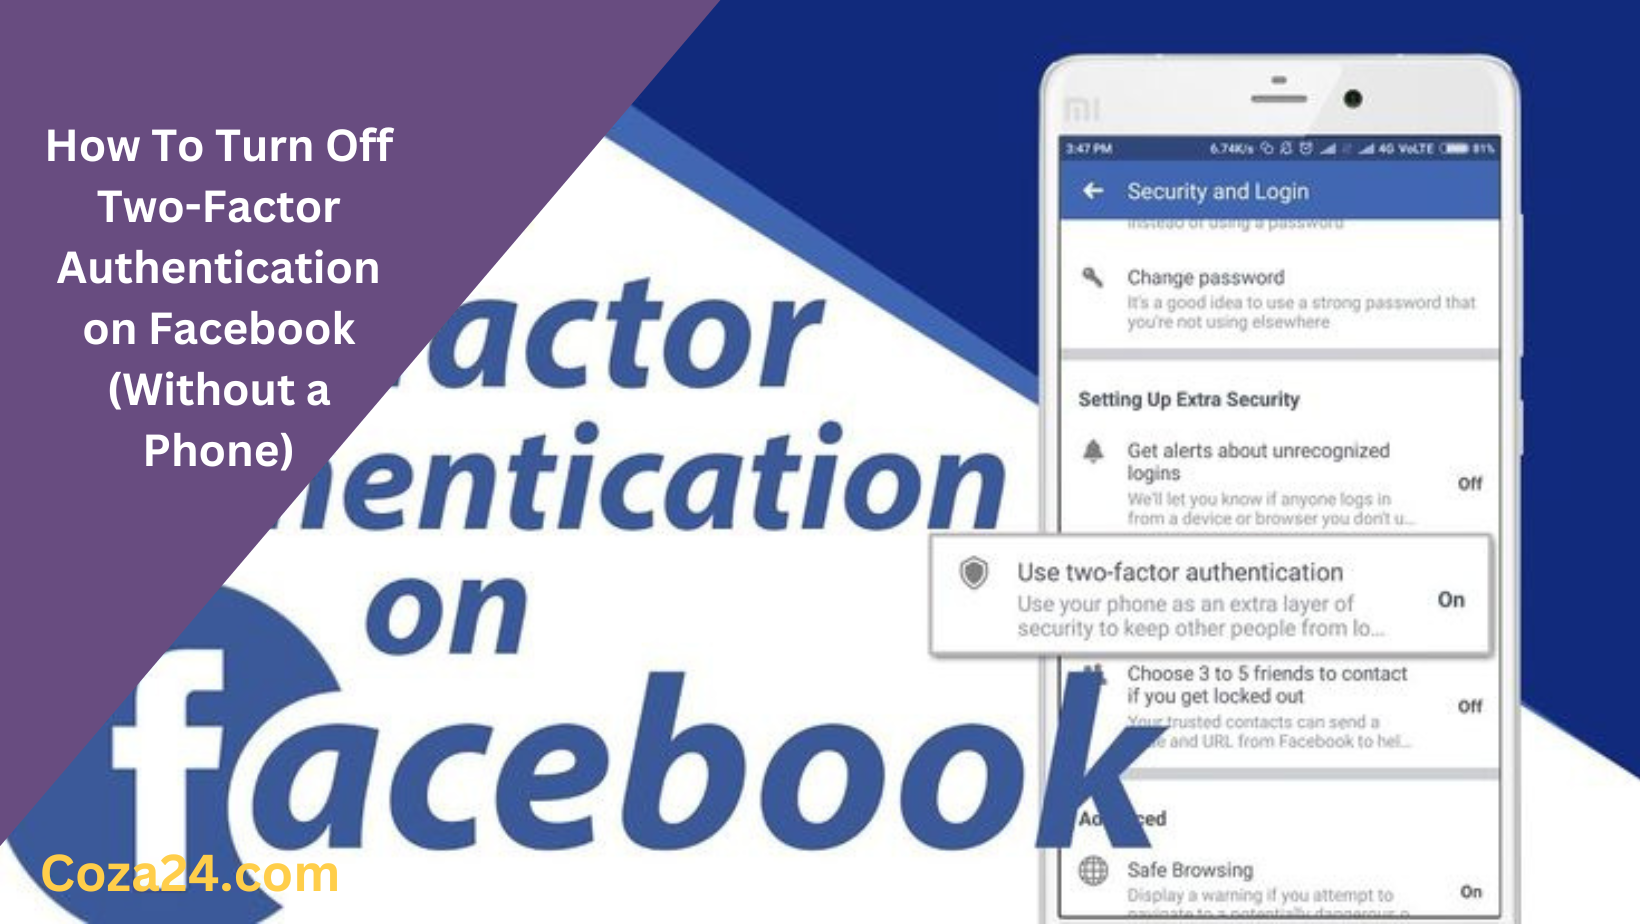 How To Turn Off Two-Factor Authentication on Facebook (Without a Phone)